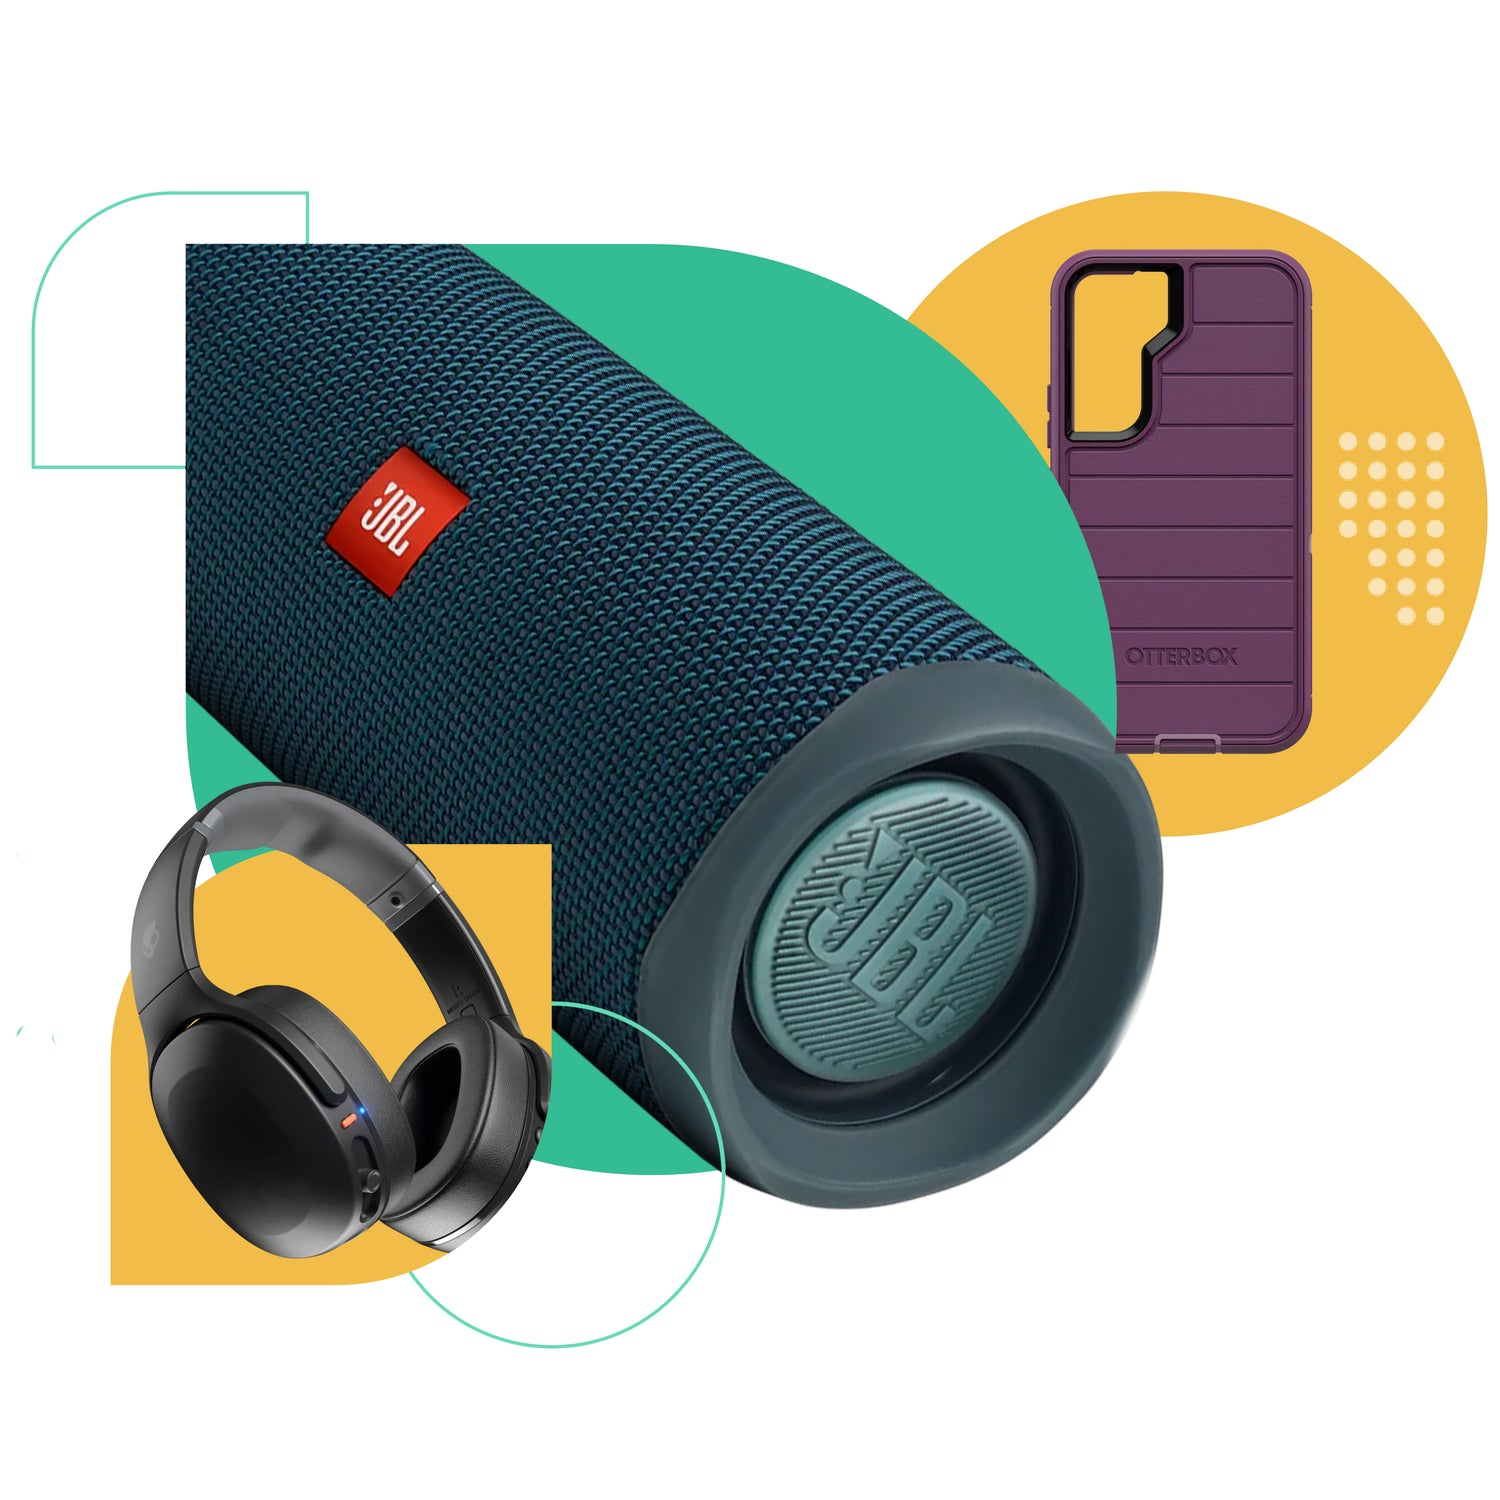 We're your go-to for phone cases, chargers, headphones, and over 3,000 more tech products.